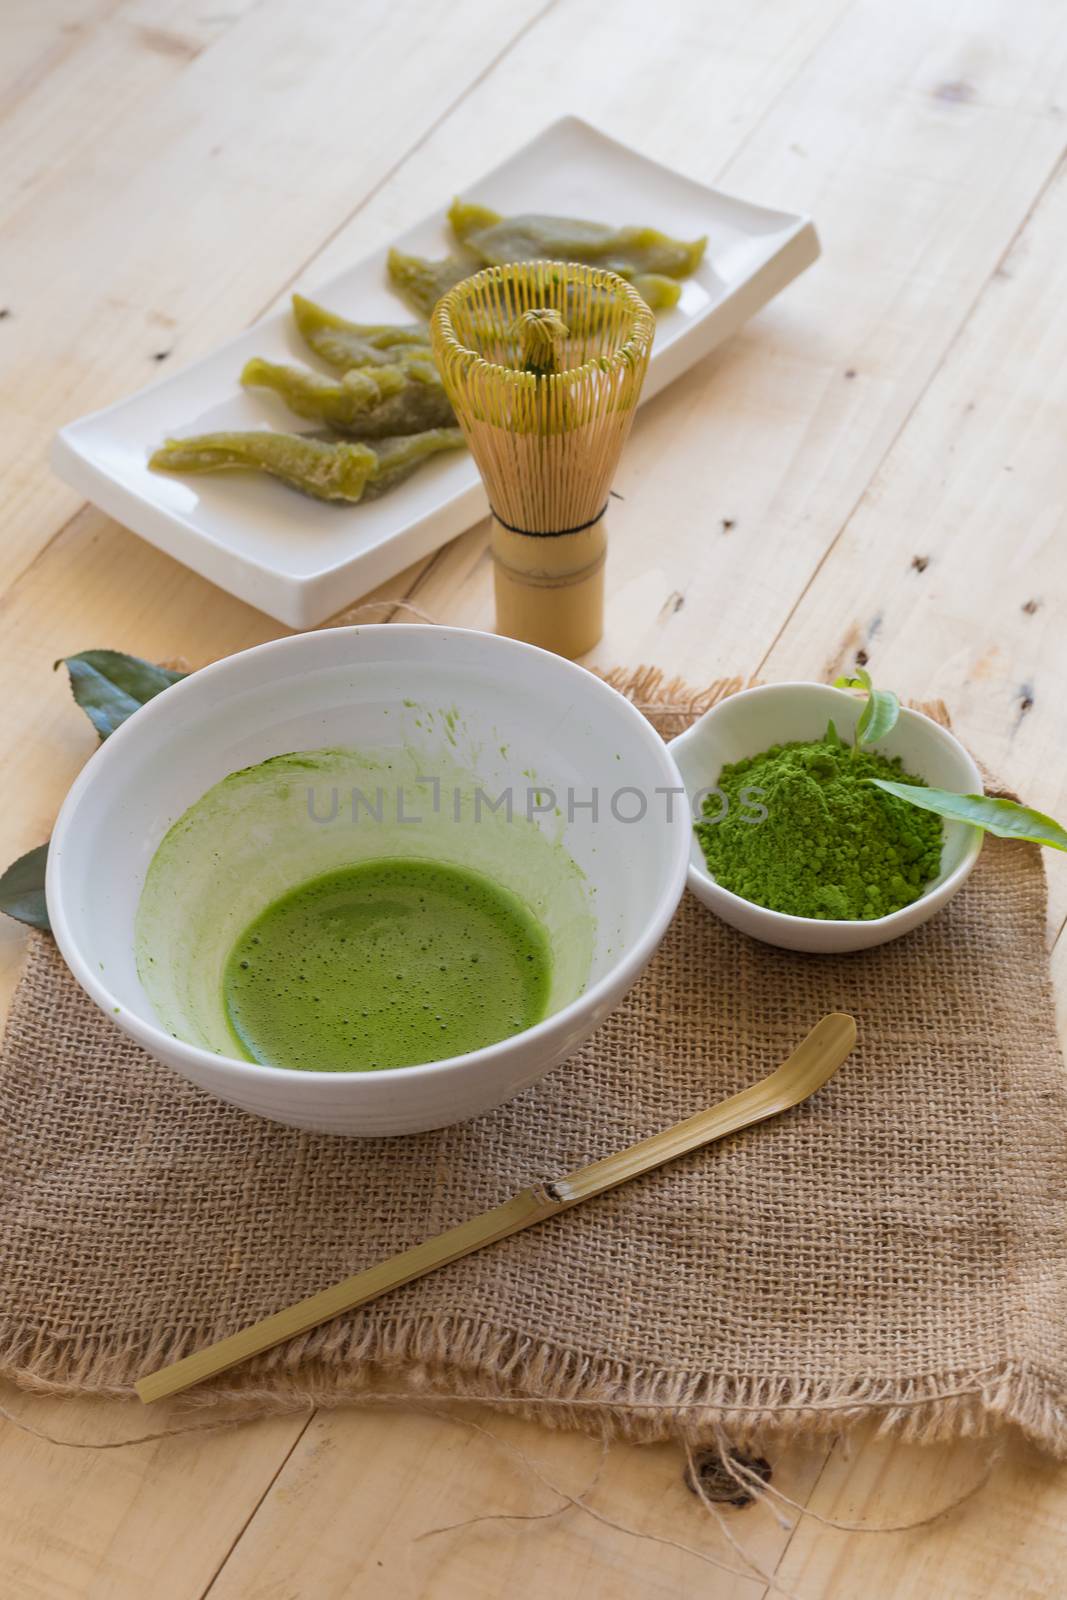 Set of matcha powder bowl, wooden spoon and whisk, green tea lea by kaiskynet